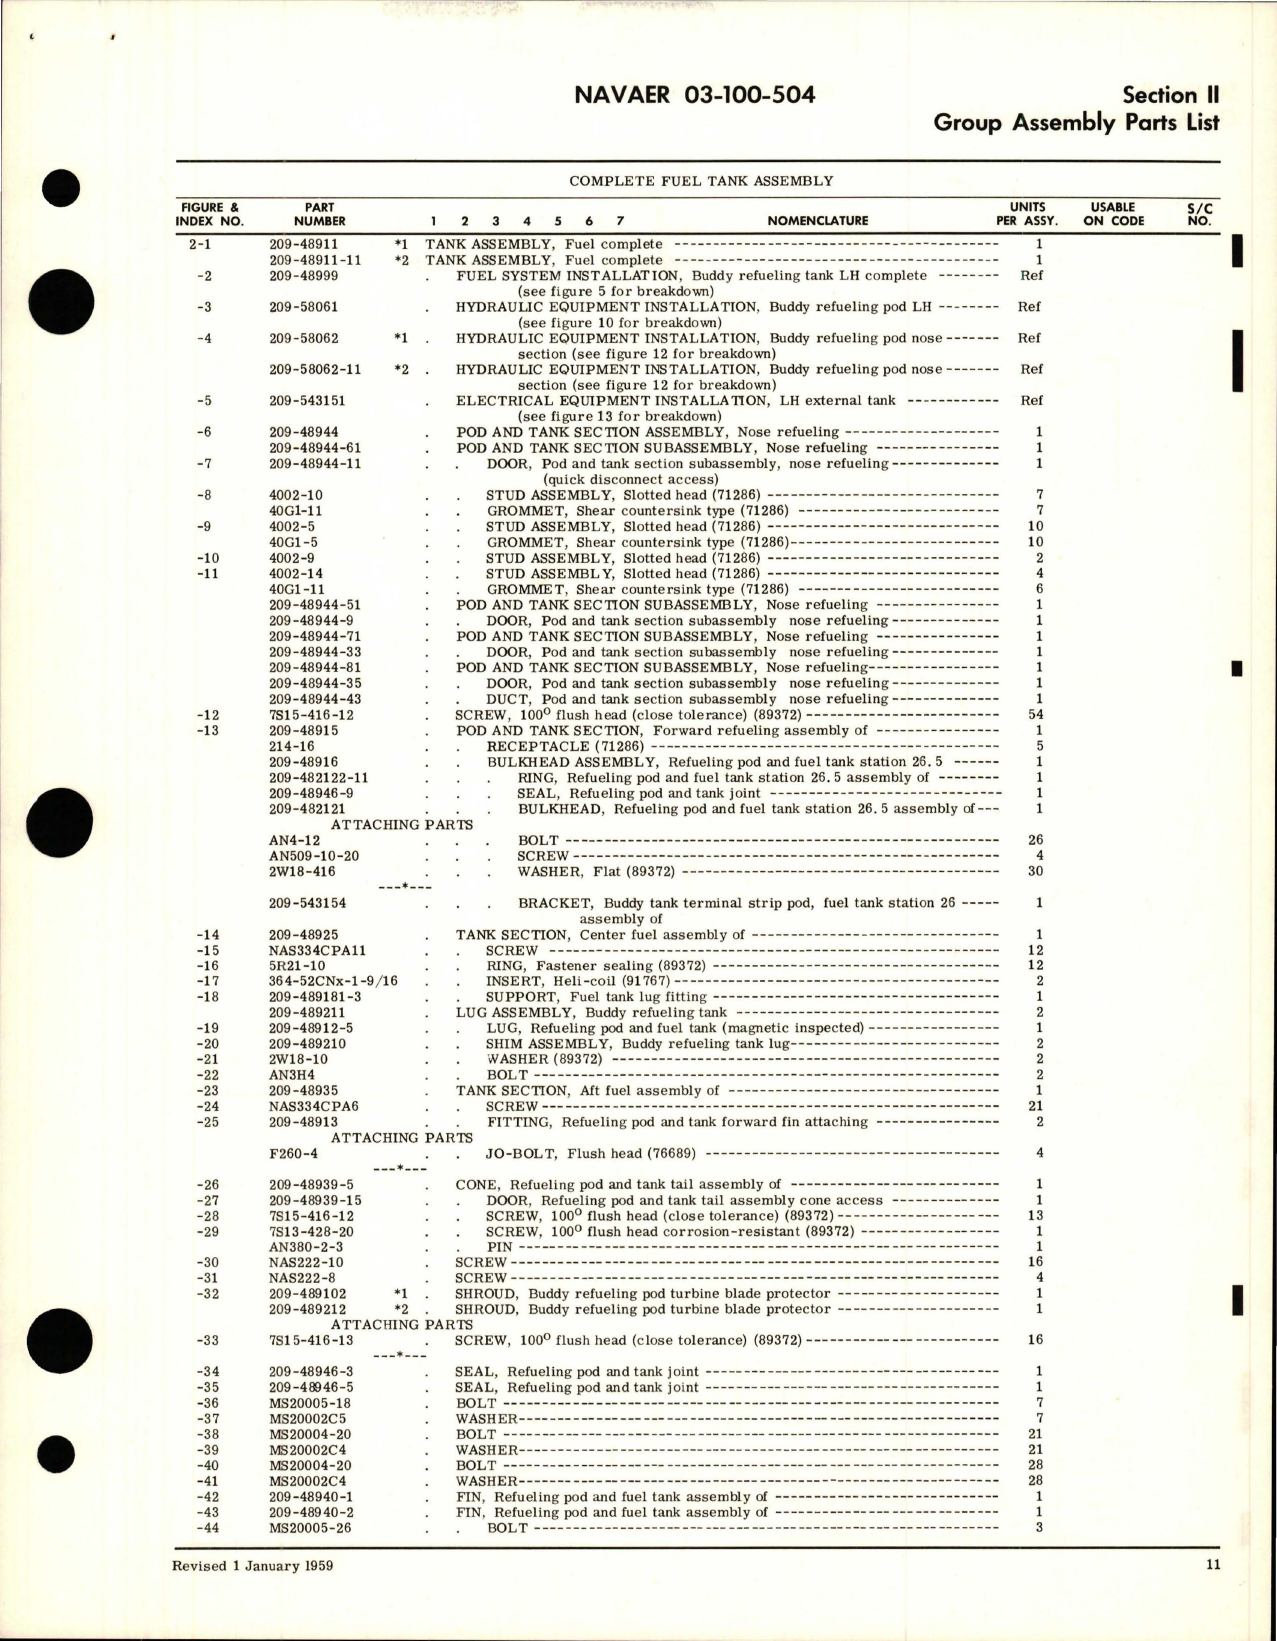 Sample page 5 from AirCorps Library document: Illustrated Parts Breakdown for In-Flight Refueling Tanker Package (Buddy Tanker) - Part 209-48901